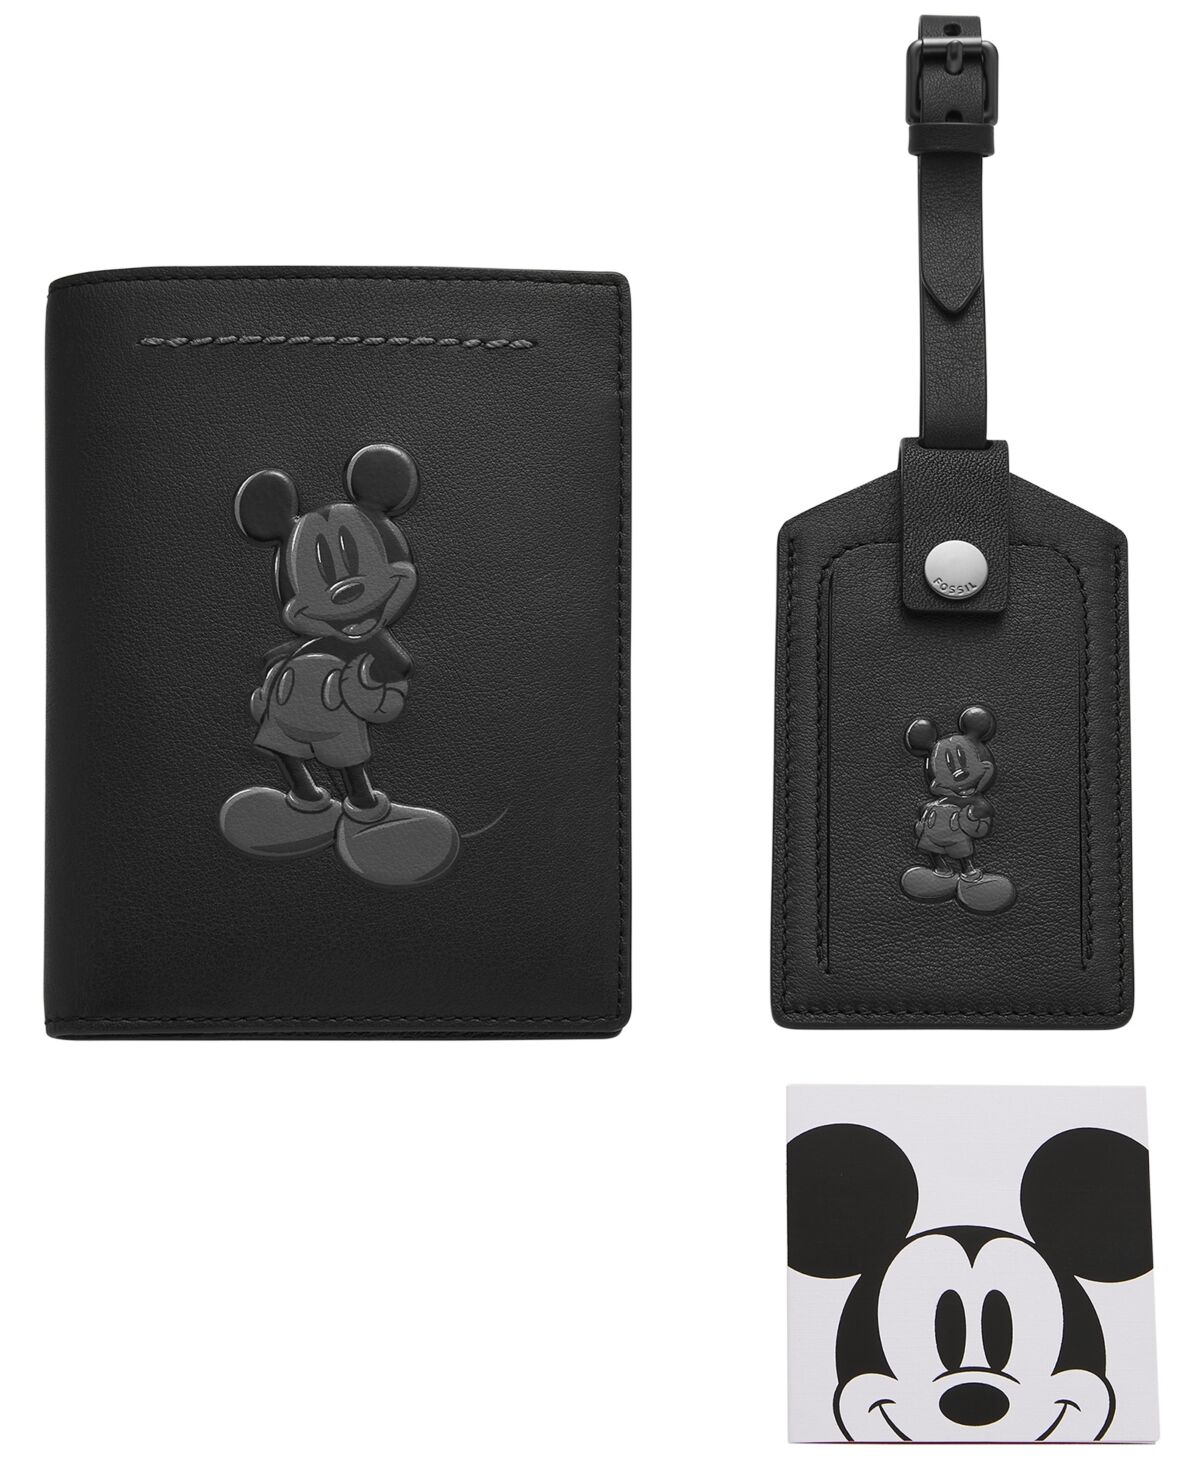 Fossil x Disney Special Edition Passport Case and Luggage Tag Gift Set - Black